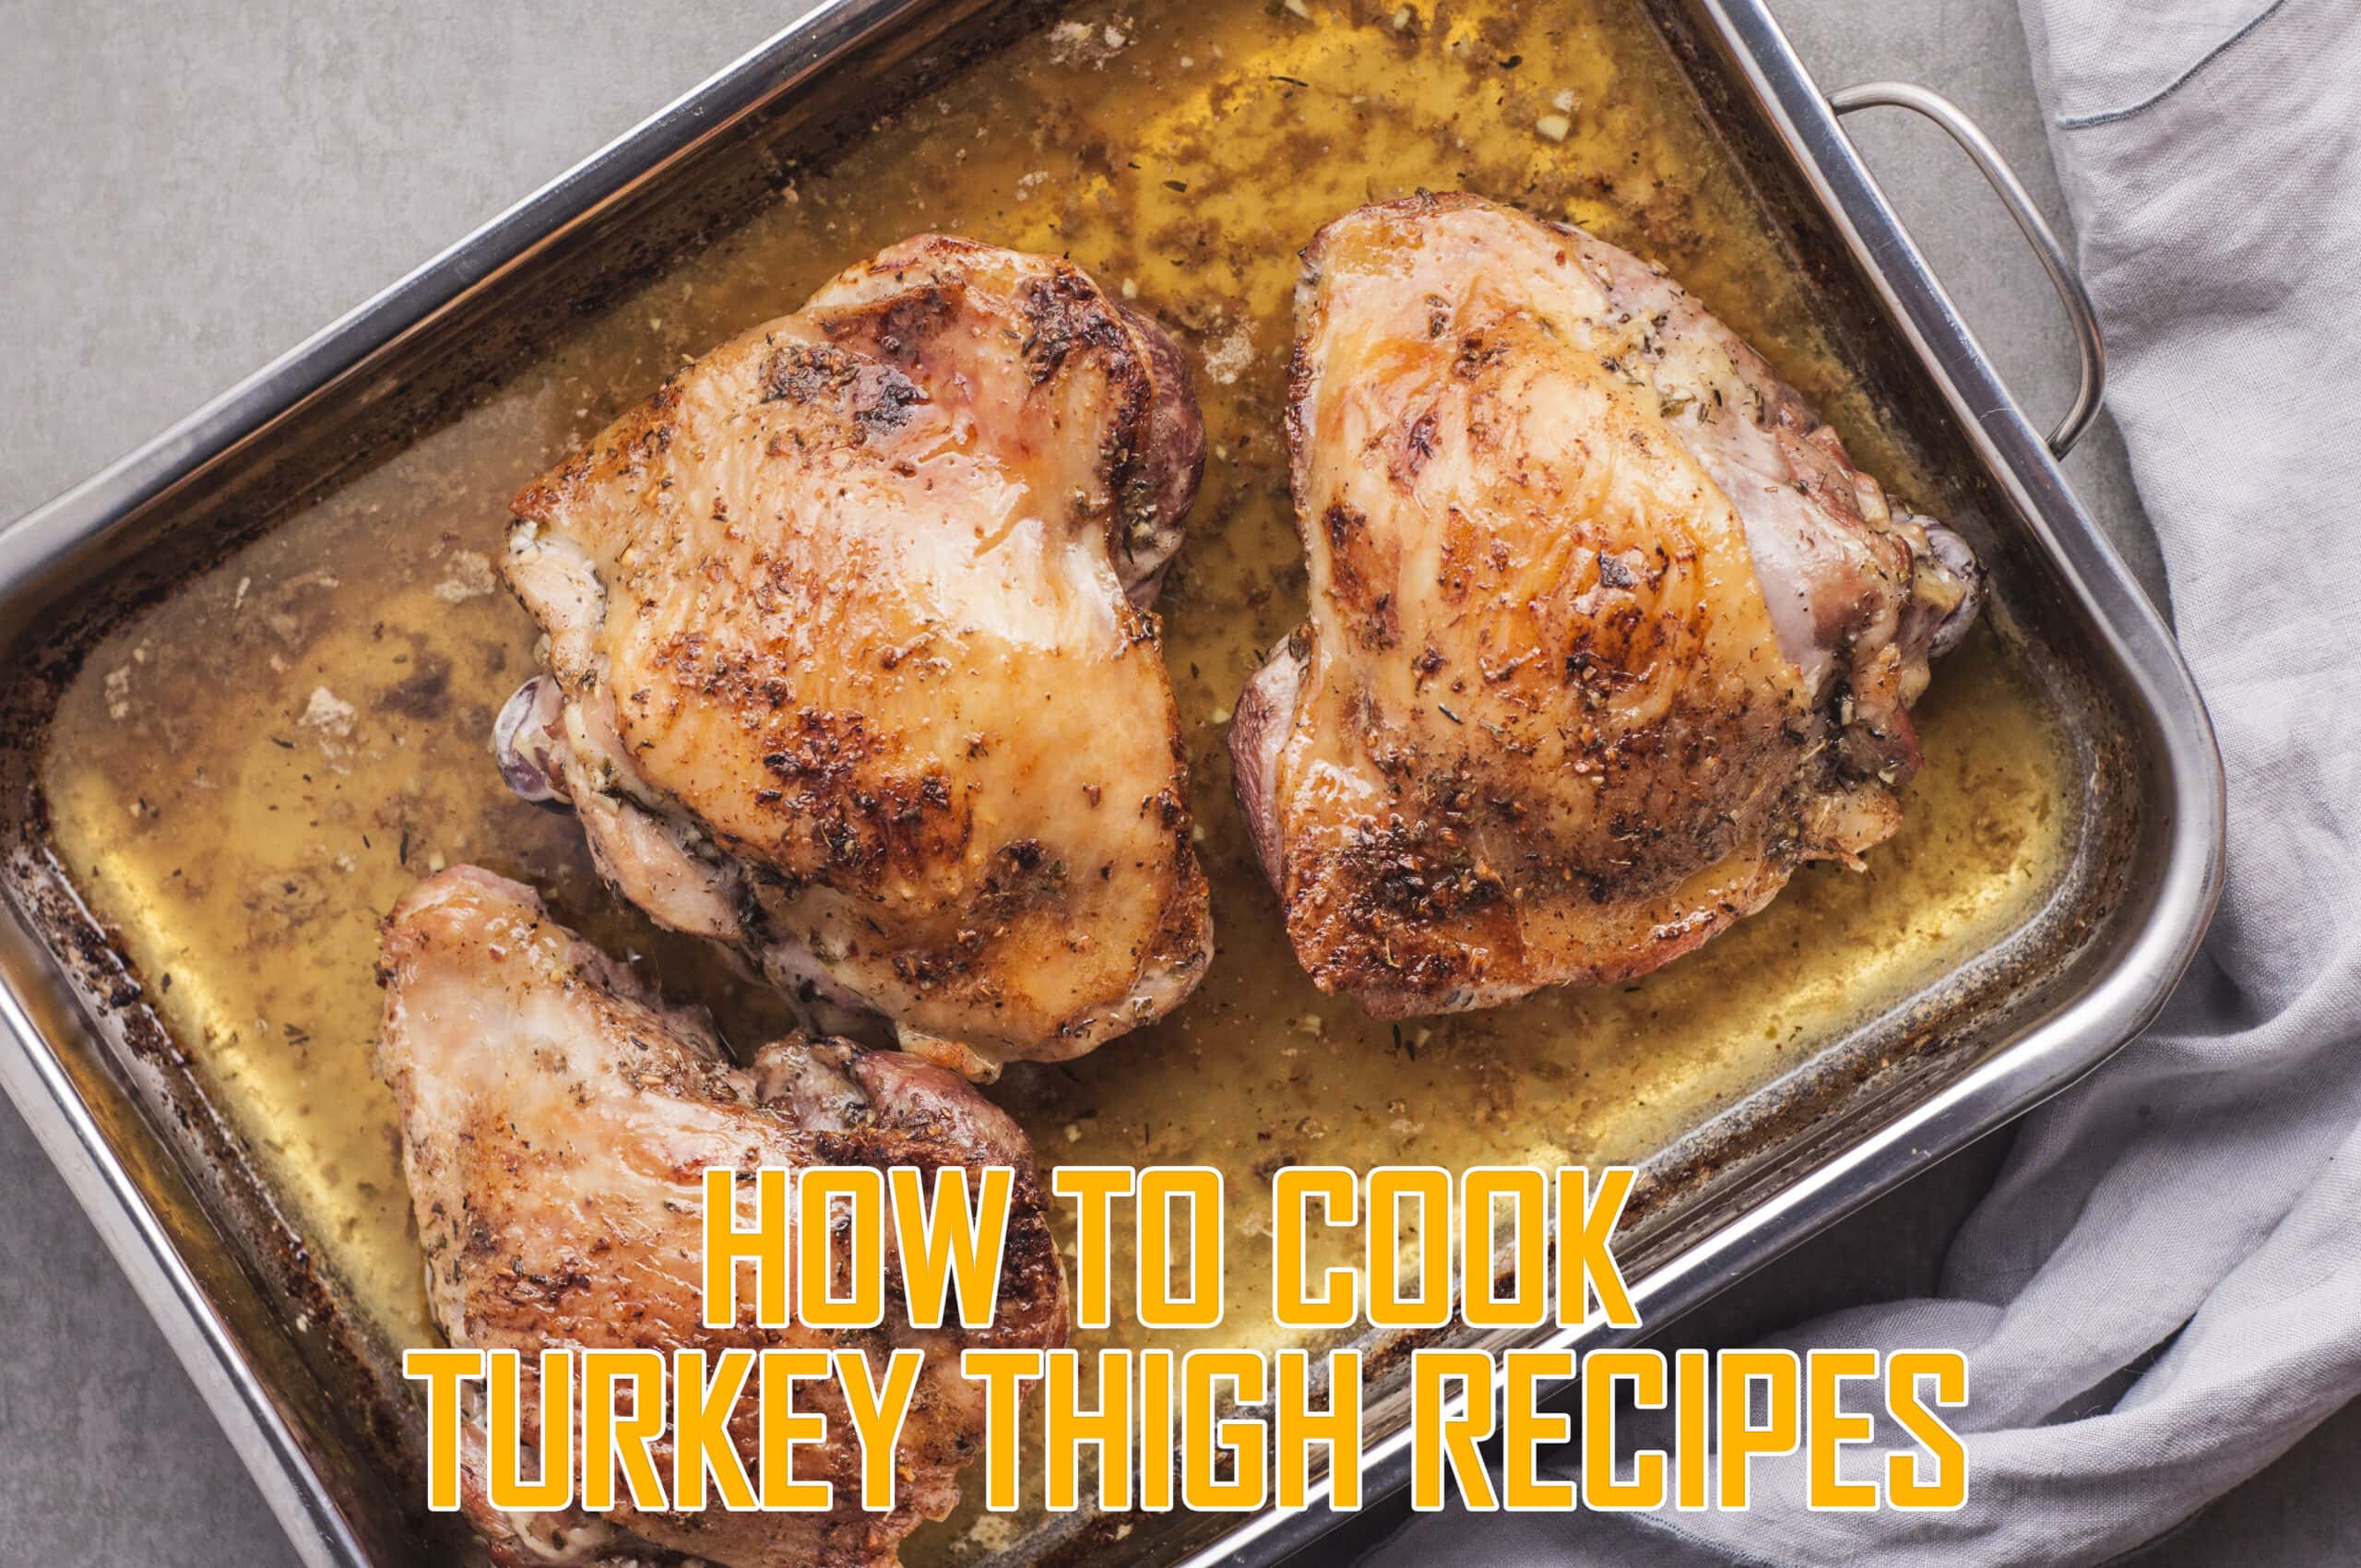 How to Cook Turkey Thigh Recipes